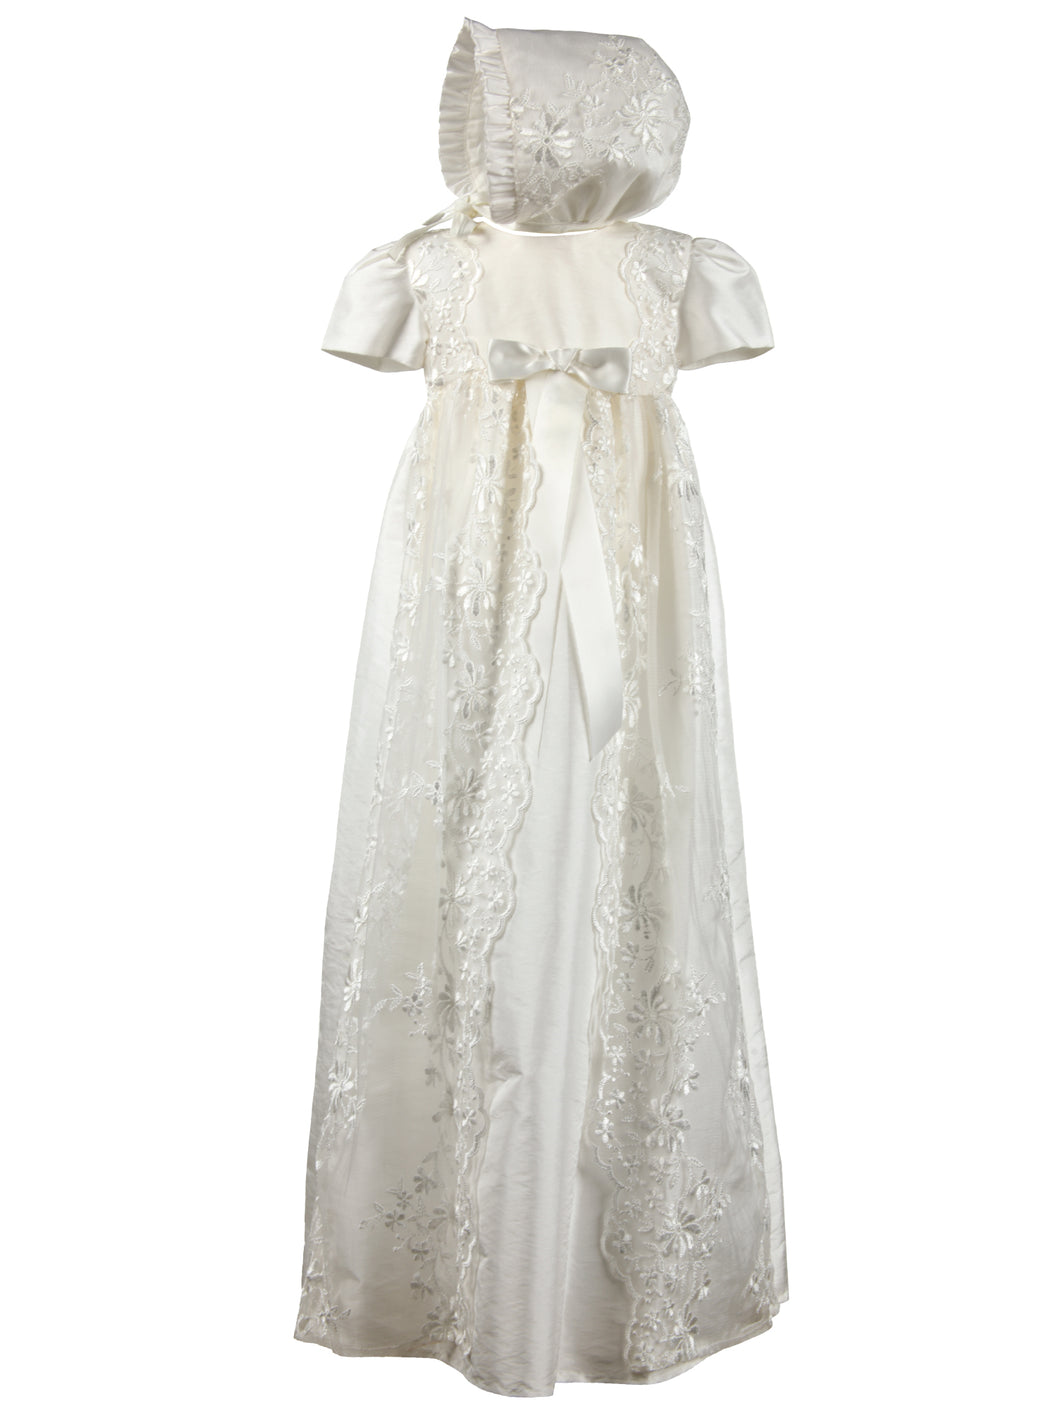 Harmony - Traditional Lace Christening Gown with Matching Bonnet